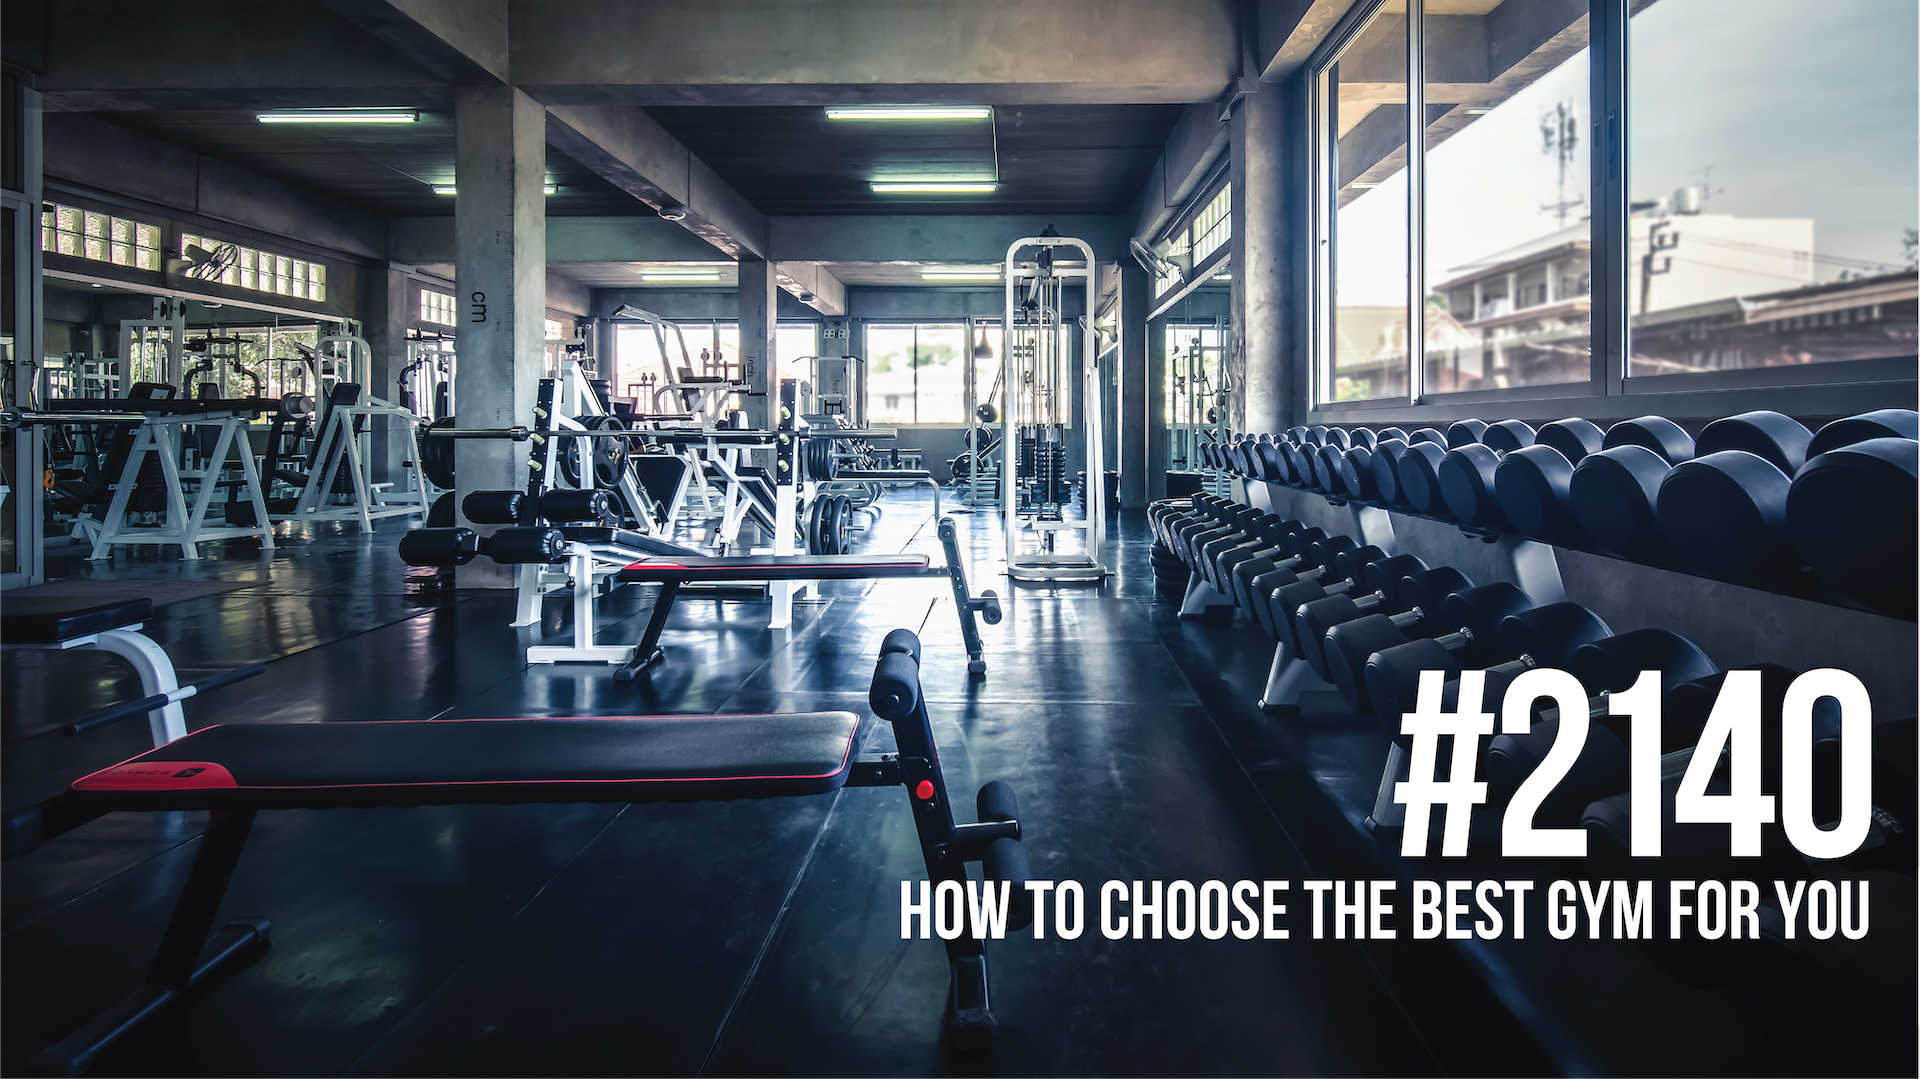 2140: How to Choose the Best Gym for You